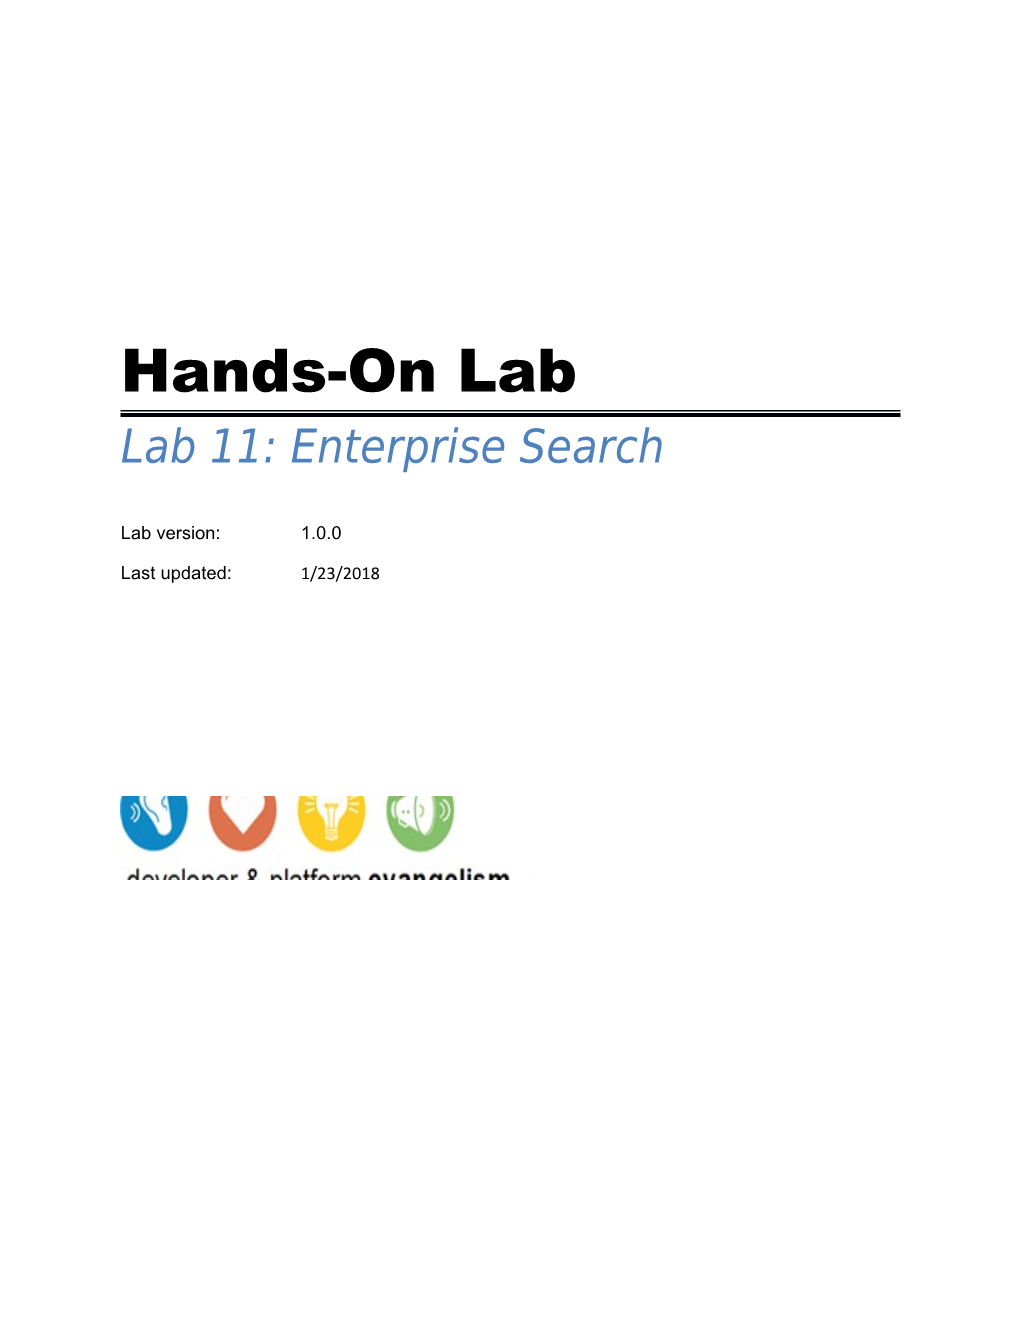 Extending Sharepoint Search Lab